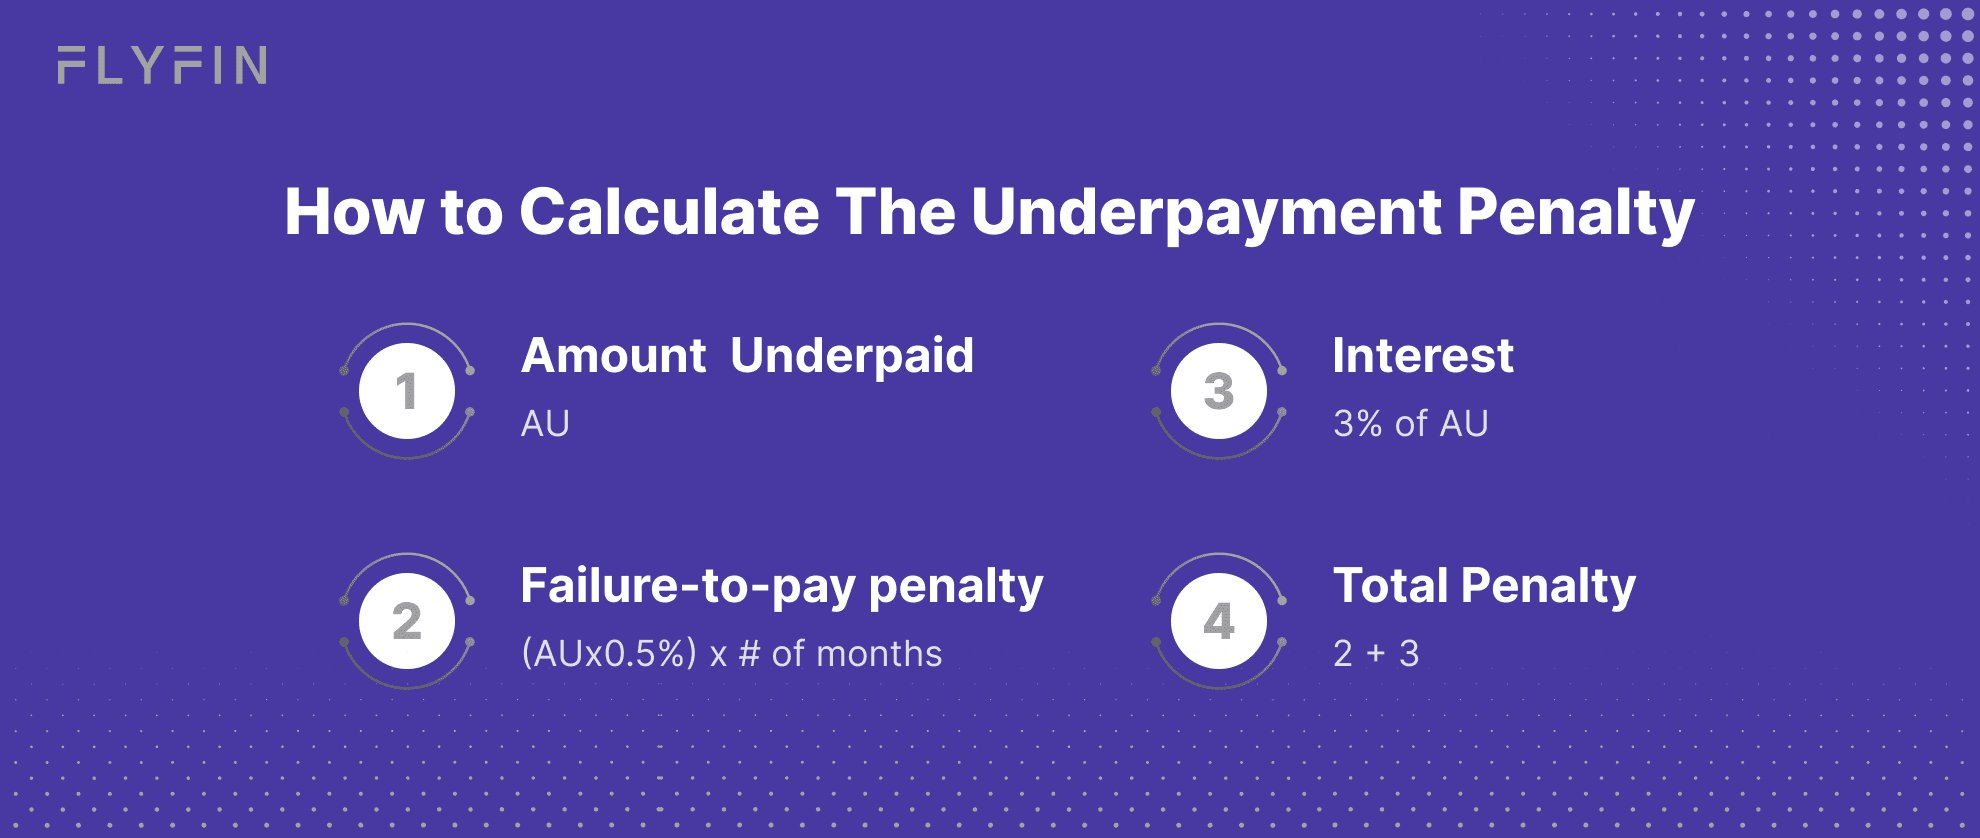 Alt text: Learn how to calculate the underpayment penalty amount for taxes. Includes formula for failure-to-pay penalty and interest. No mention of self-employed or 1099.